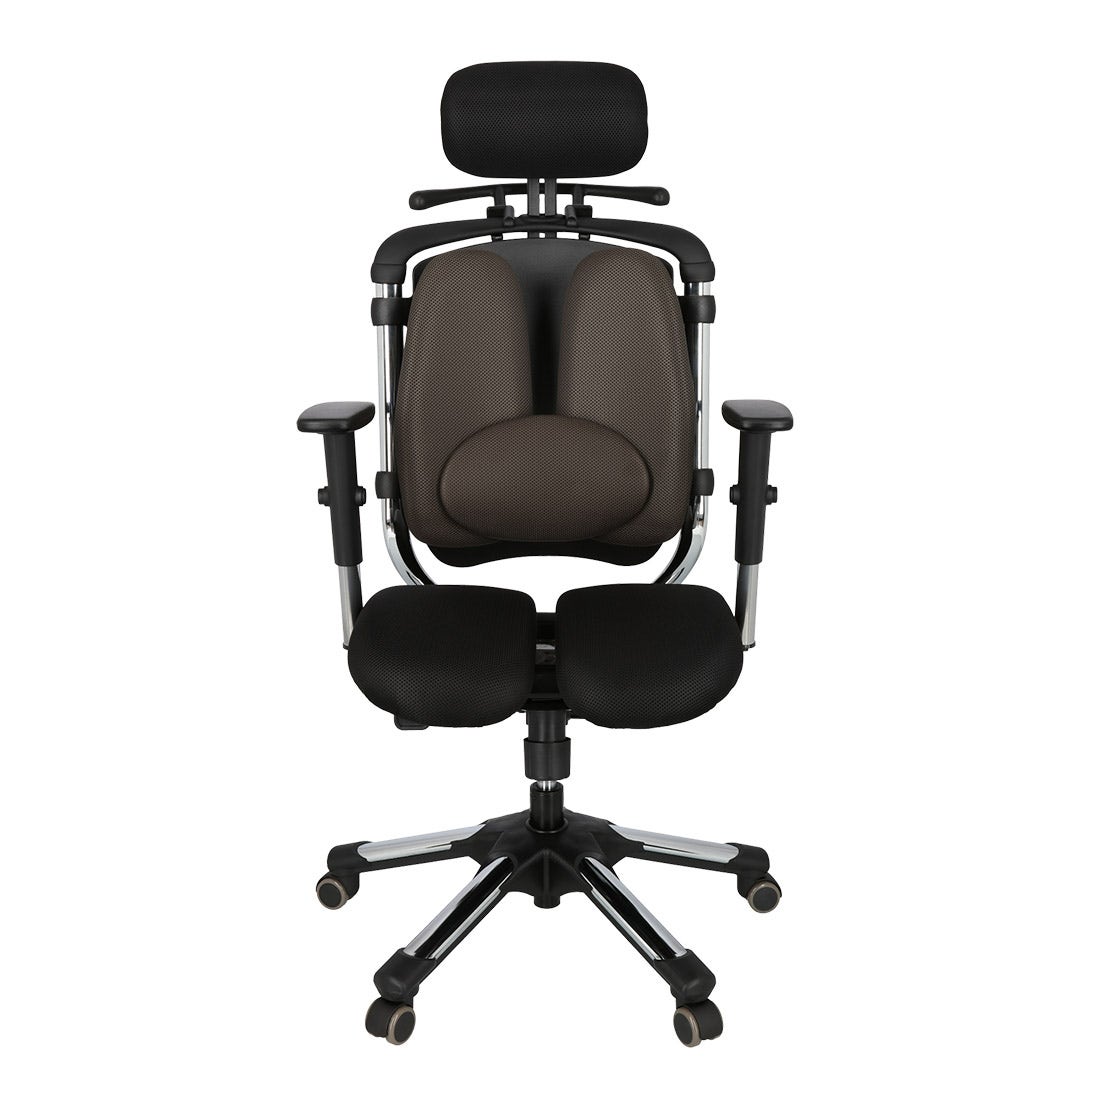 39014947-furniture-home-office-gaming-office-chair-01